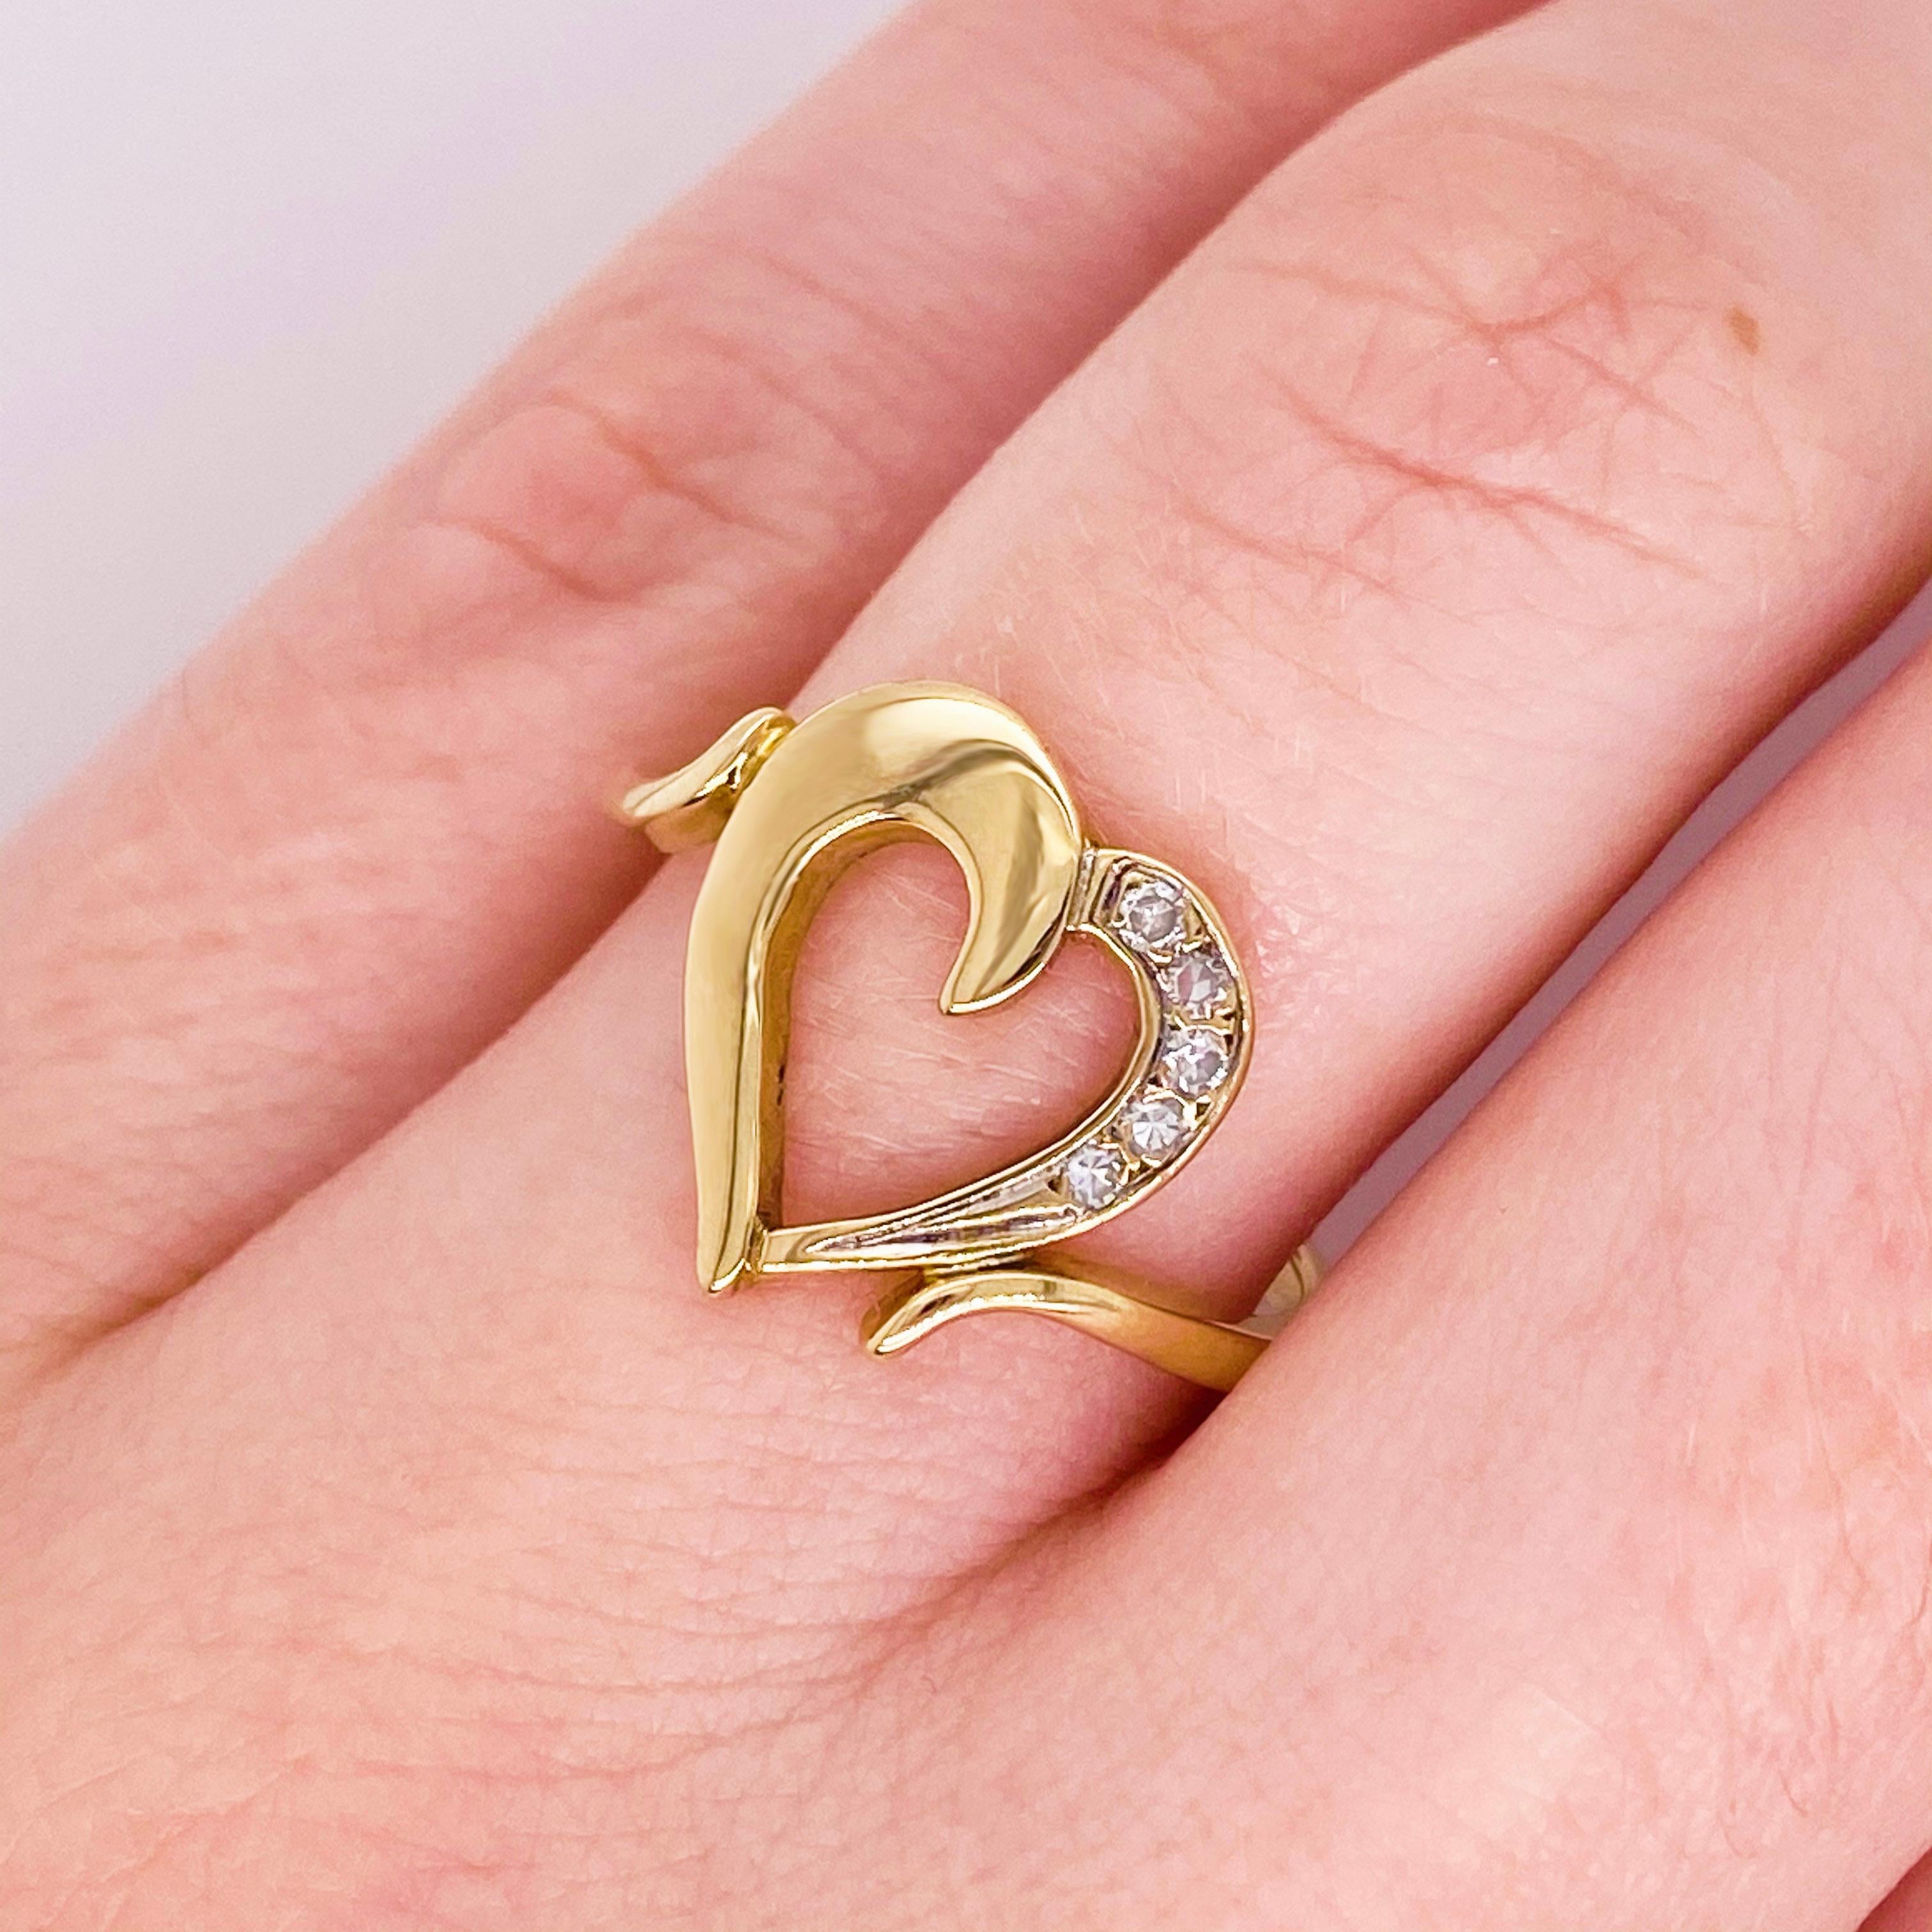 This ring will melt any girls' heart!  The and 14k yellow gold sparkles and shines and has five gorgeous round diamonds that flow well with the heart design! The 14 karat yellow gold metal is like a rich, buttery color. This ring would make the